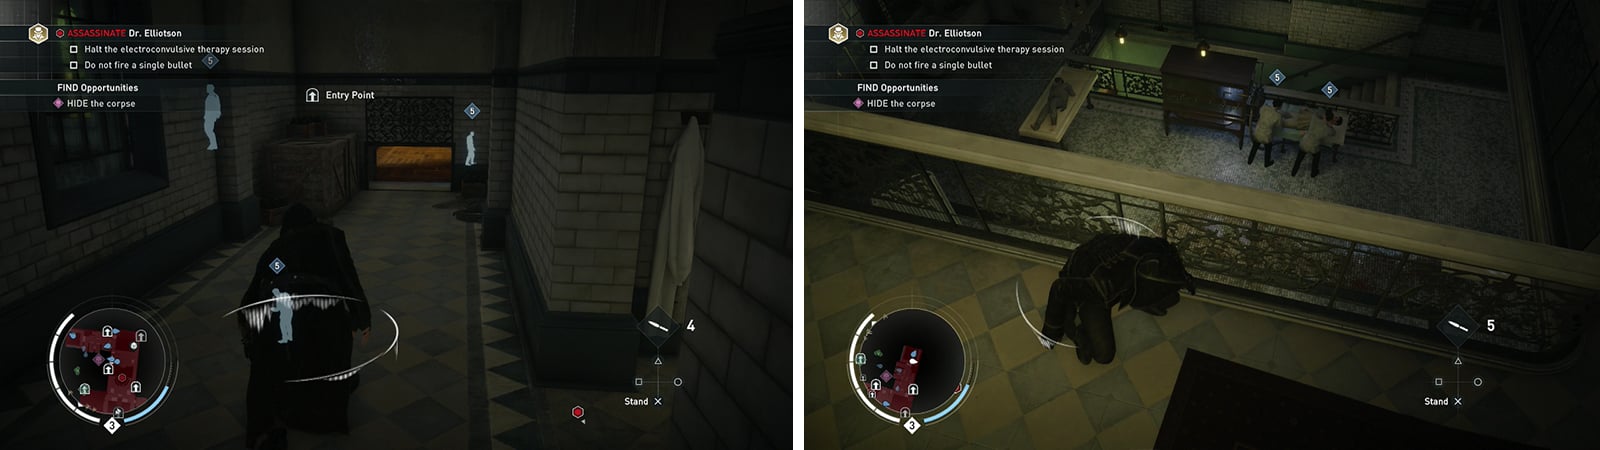 Go through the open grating near the view point (left). At the end of the hallway, assassinate the pair of doctors electrifying the patient (right).